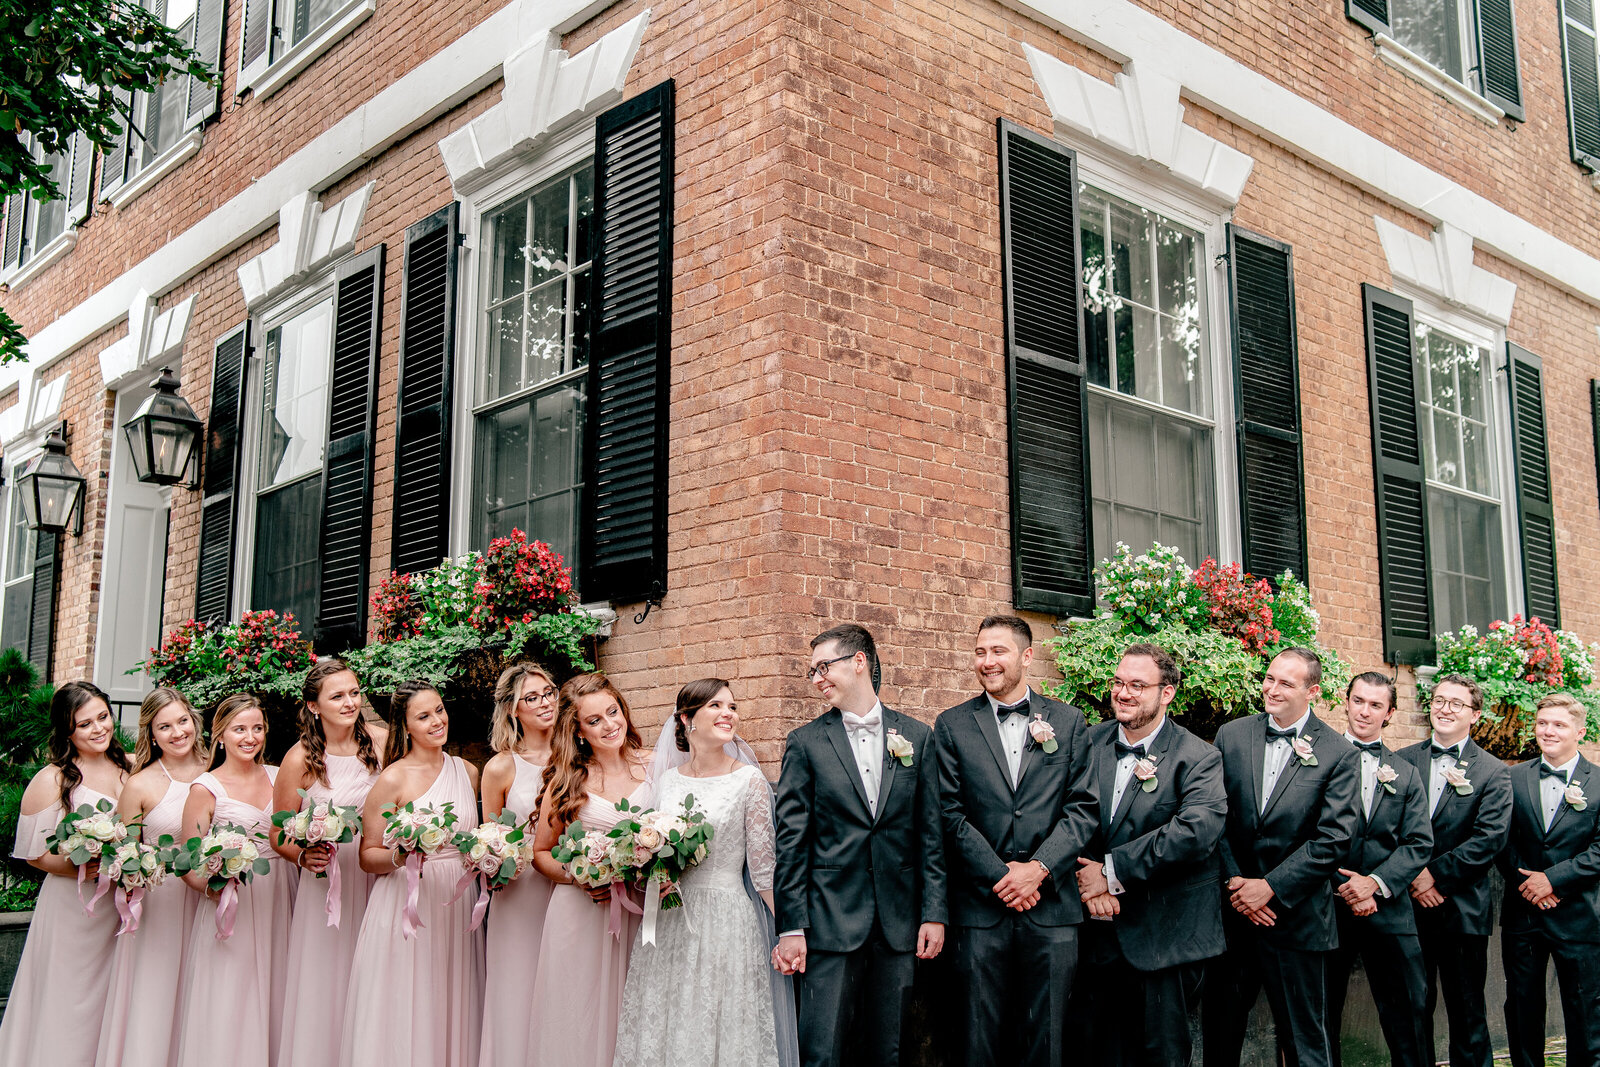 A wedding party peeking around the corner of a building during a Catholic wedding in Northern Virginia